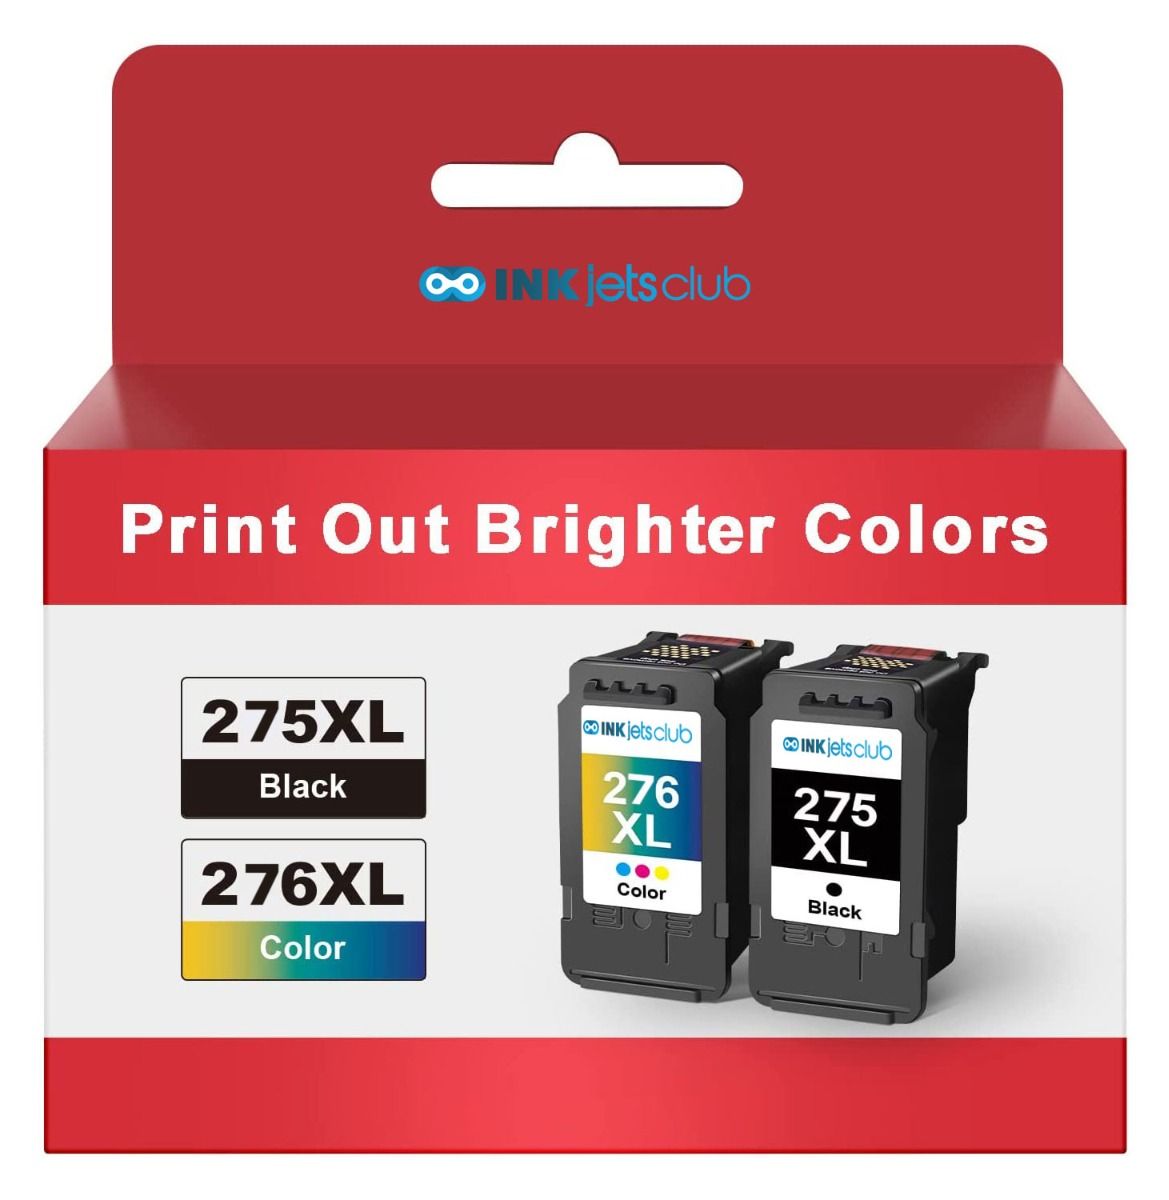 Canon PG-545/CL-546 Ink Cartridge (2 Pack)